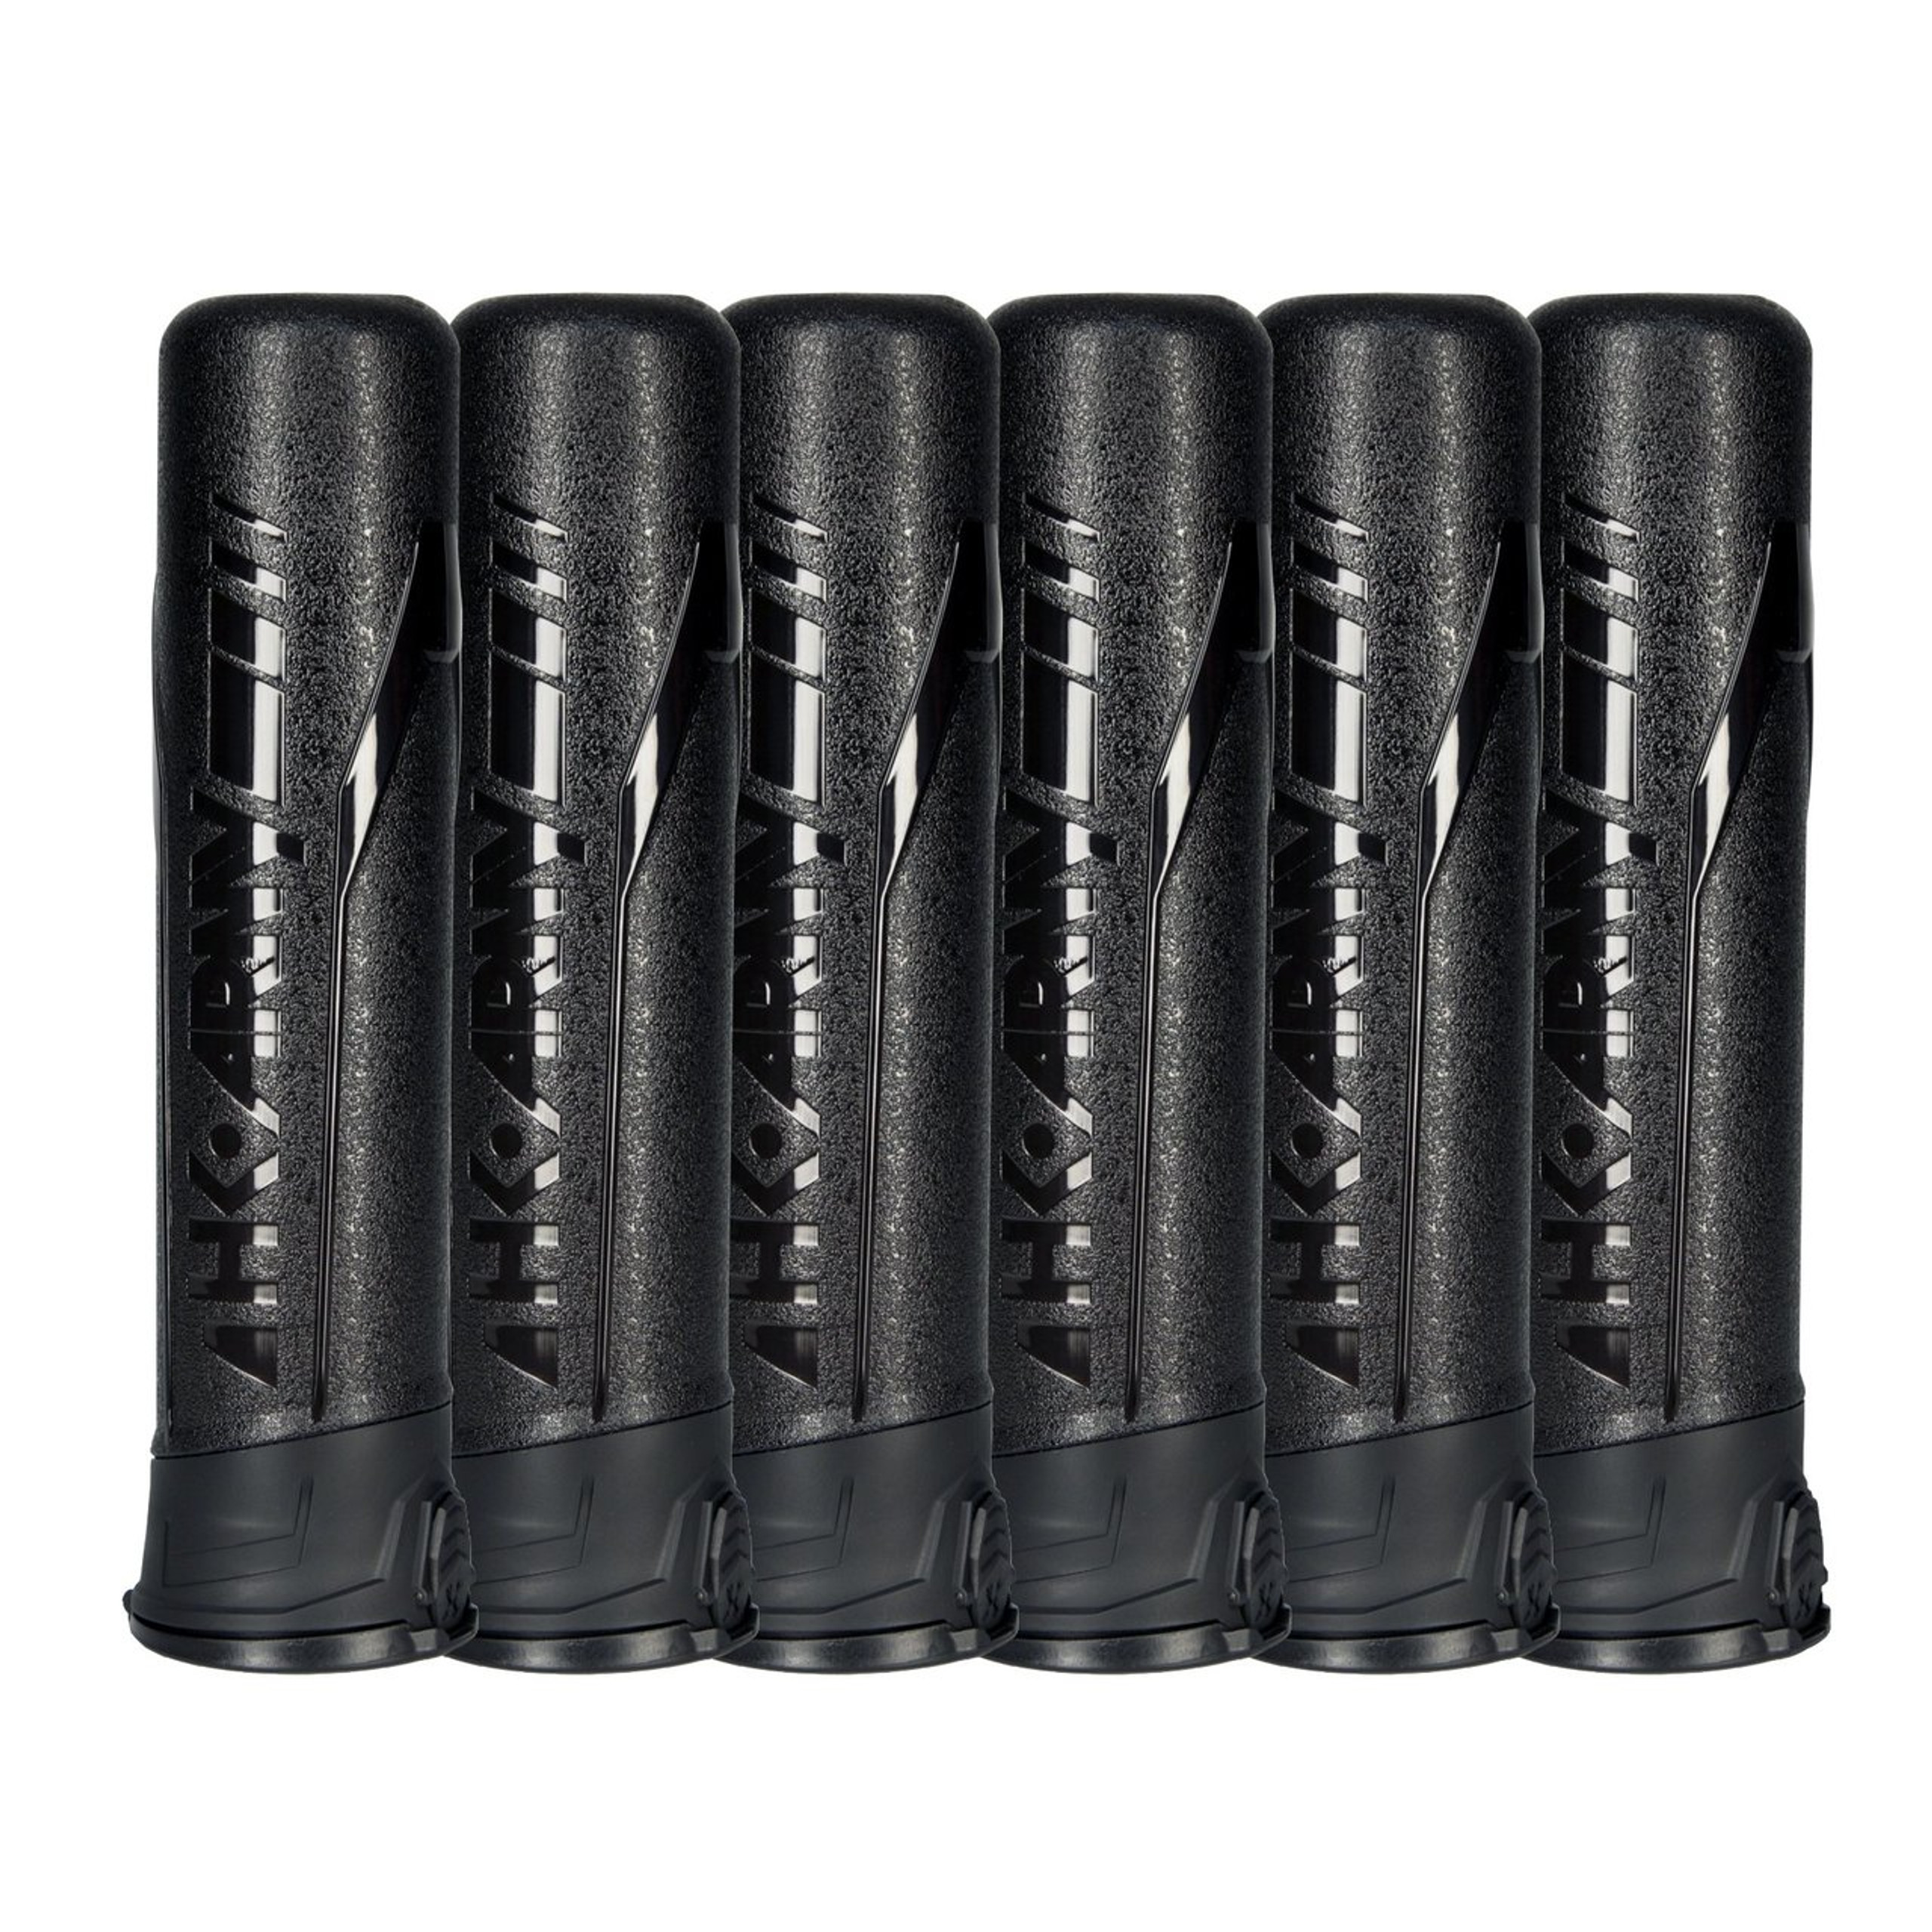 High Capacity 165 Round Pods - Black/Black - 6 Pack | Defcon Paintball ...